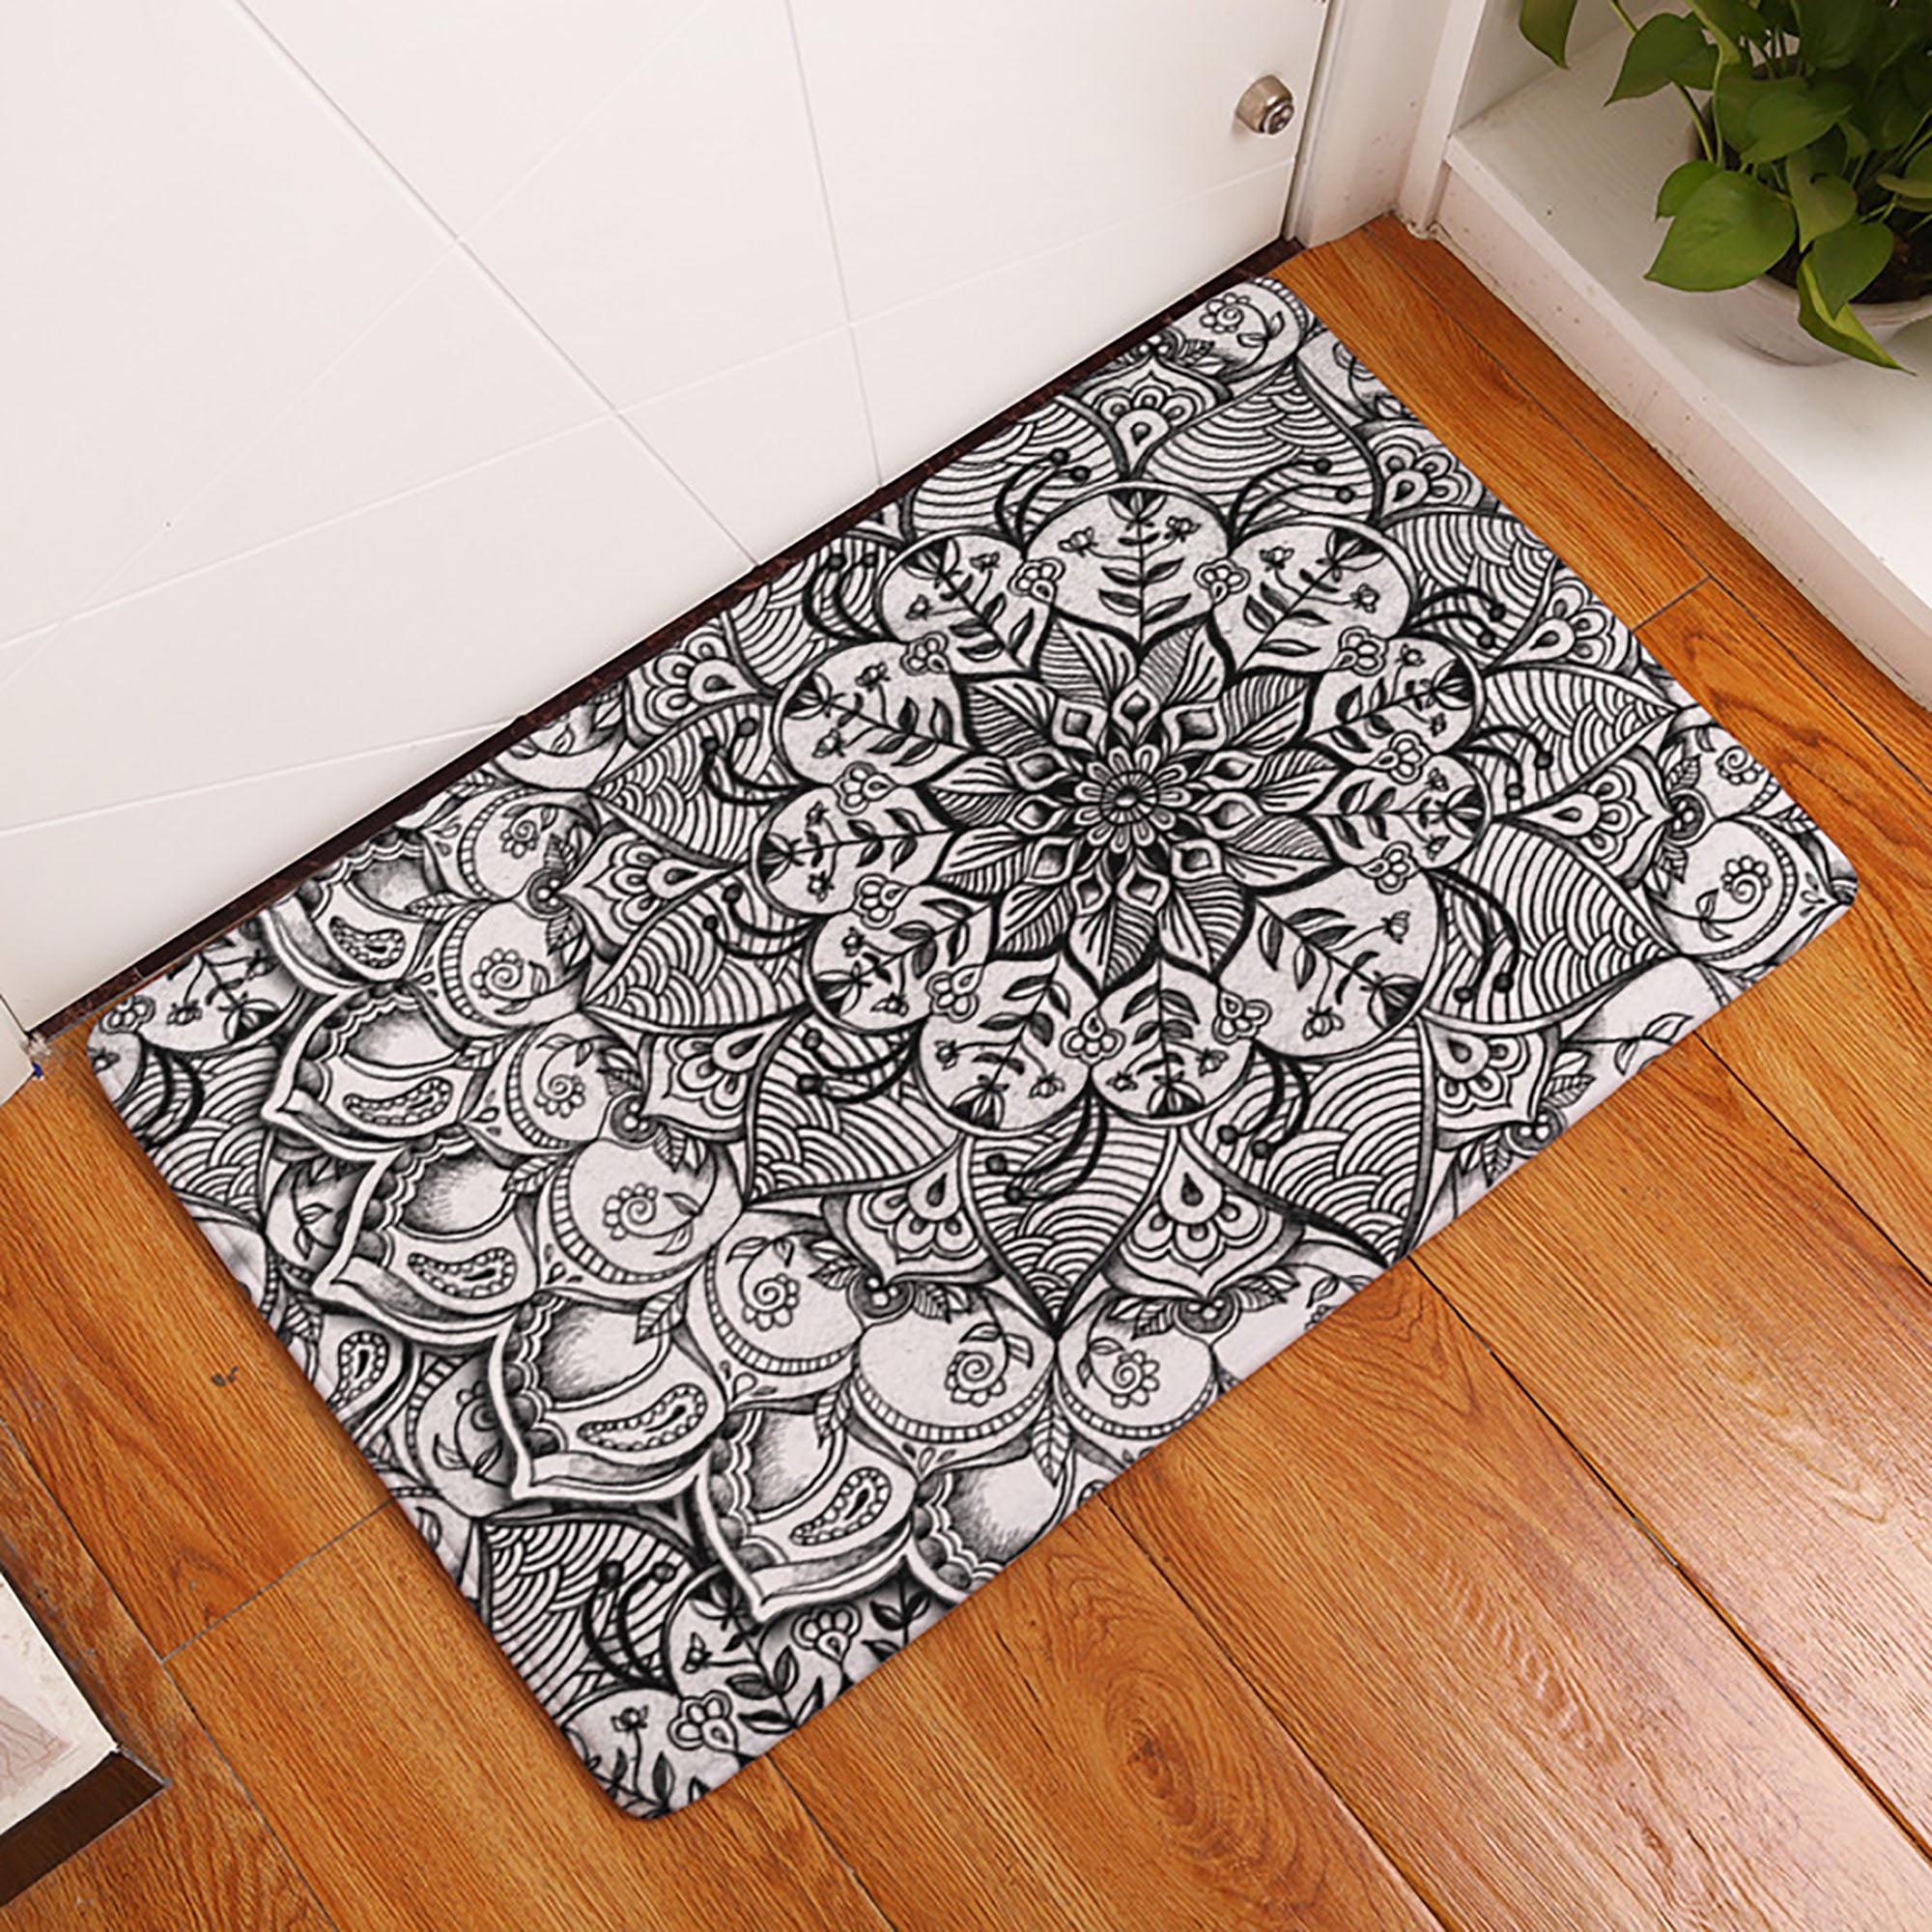 Details about   You are Here Indoor Floor Mat Non Slip Entrance Doormats Home Office Rug 